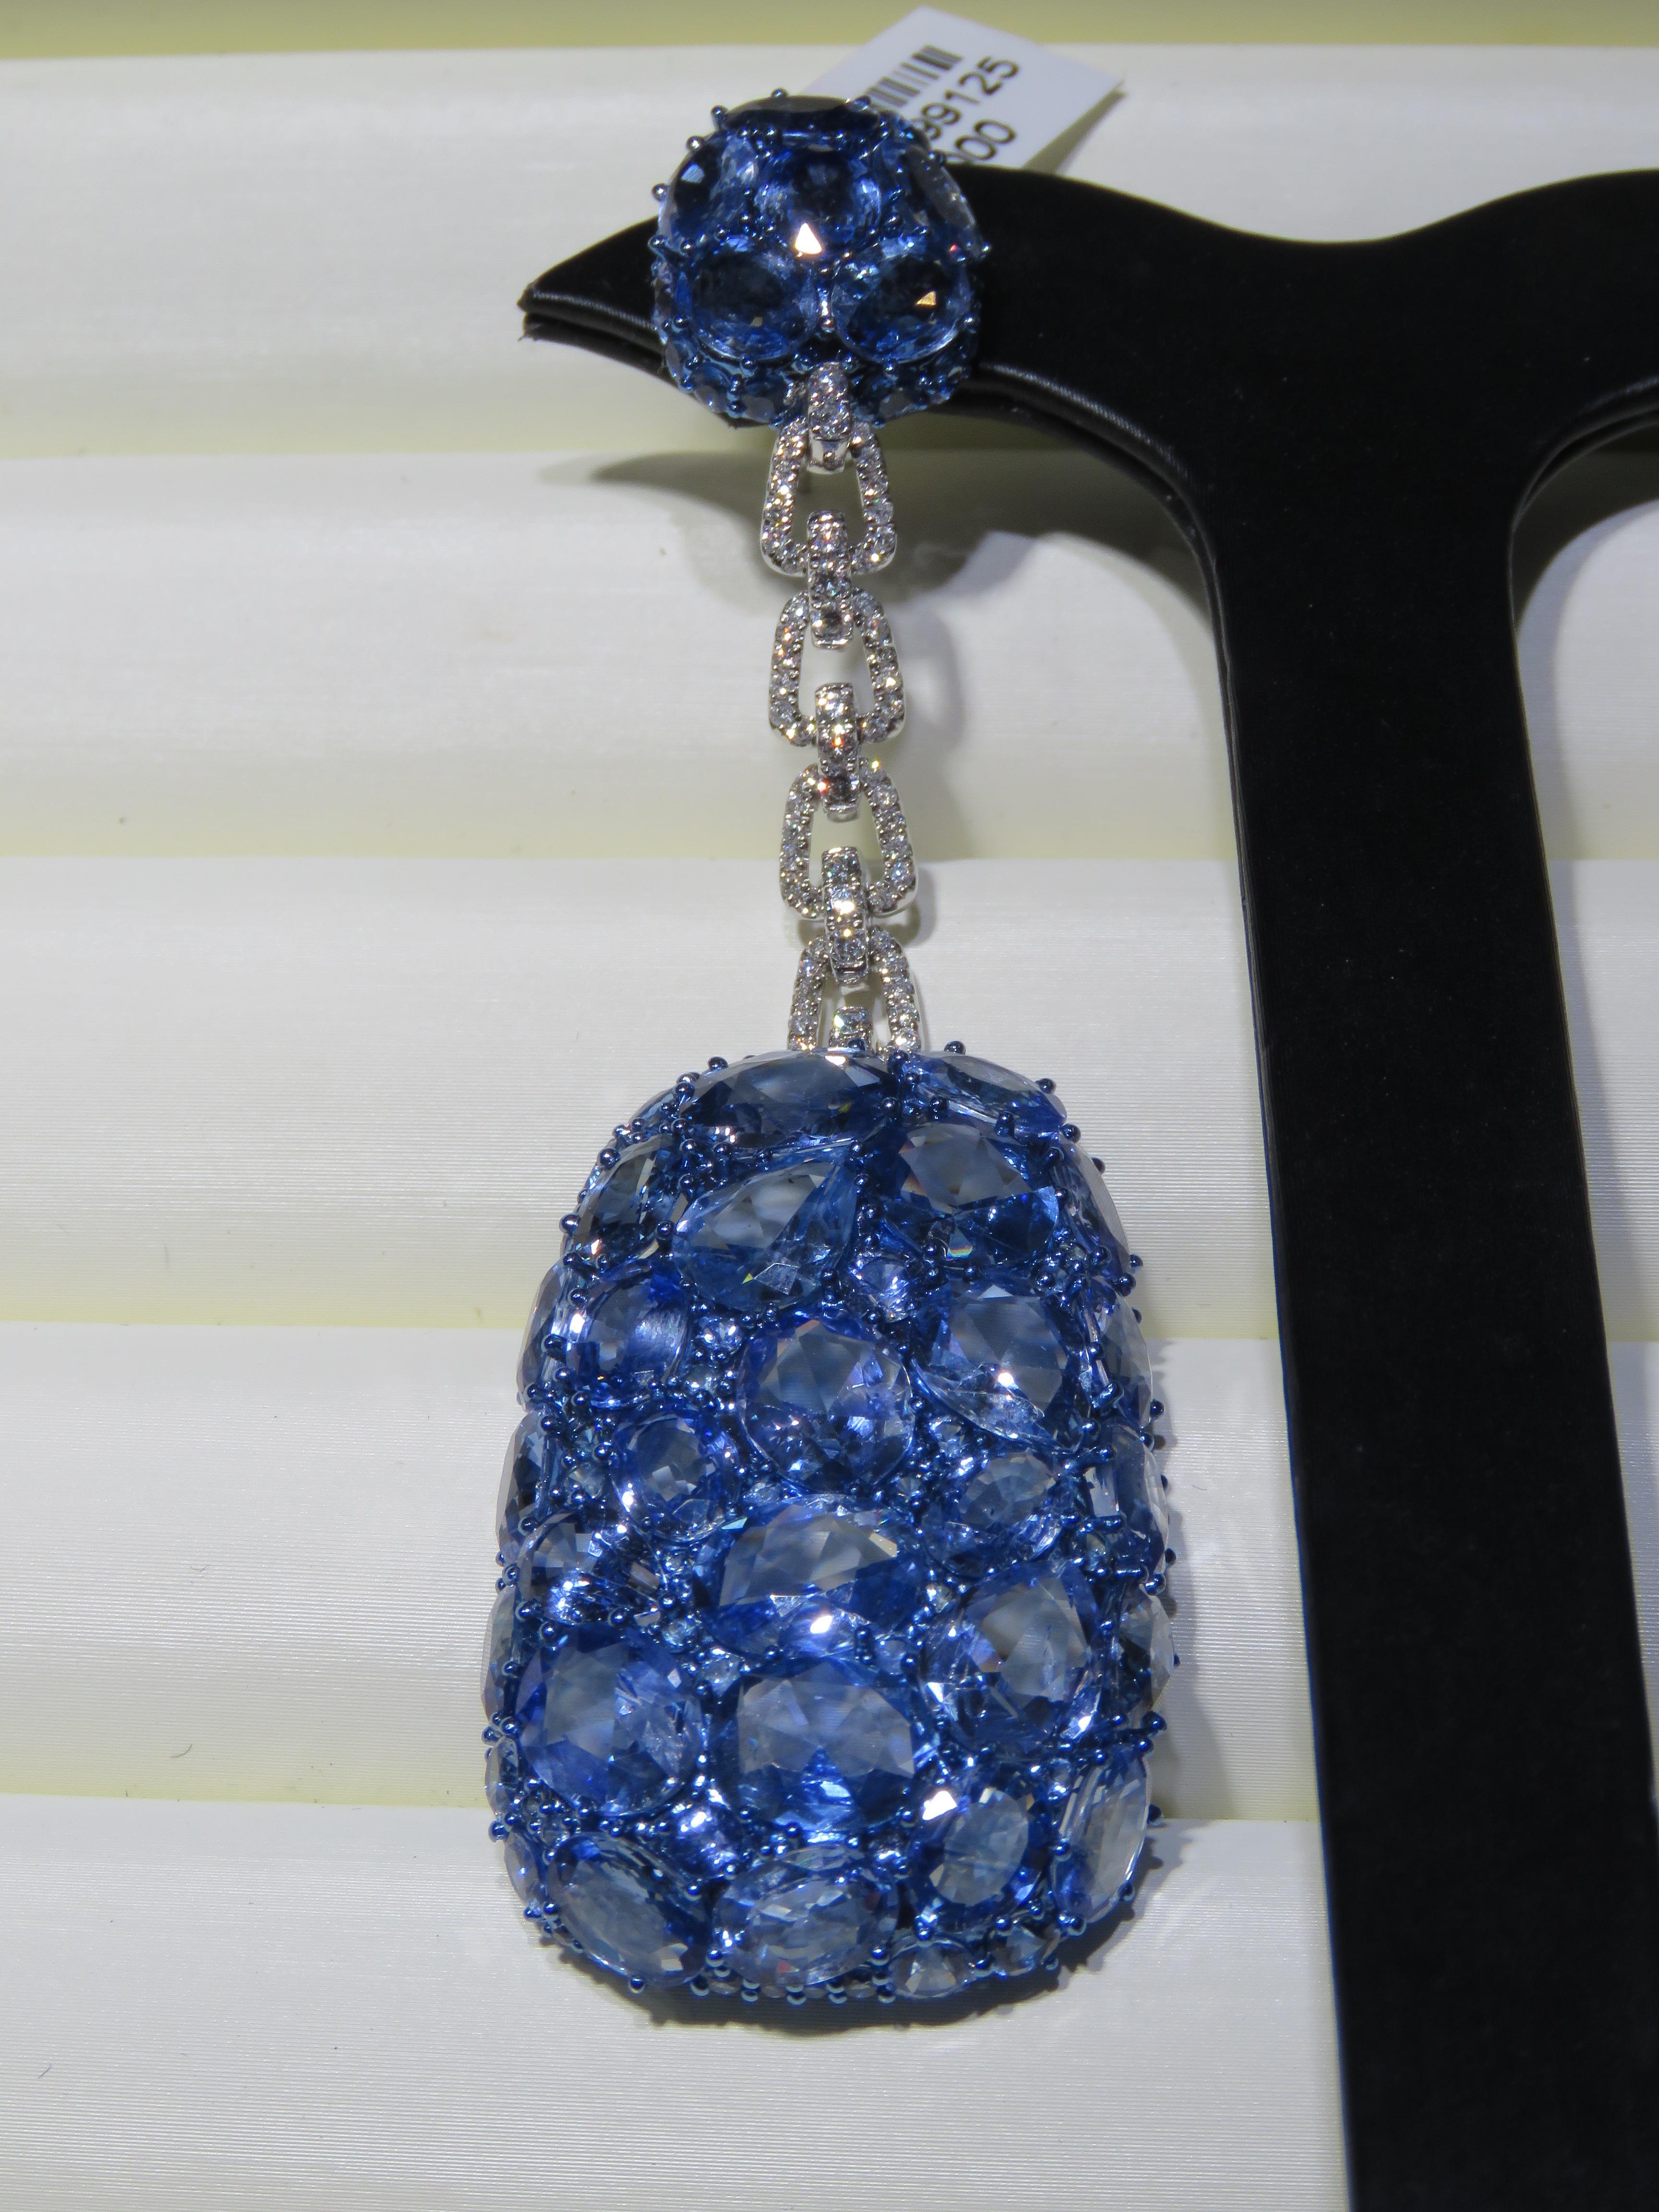 The Following Item we are offering is this Rare Important Radiant 18KT Gold Gorgeous Glittering and Sparkling Sapphire and Diamond Dangle Earrings. Earrings Contains approx 85CTS of Beautiful Fancy Sliced Sapphires and White Diamonds!!! Stones are